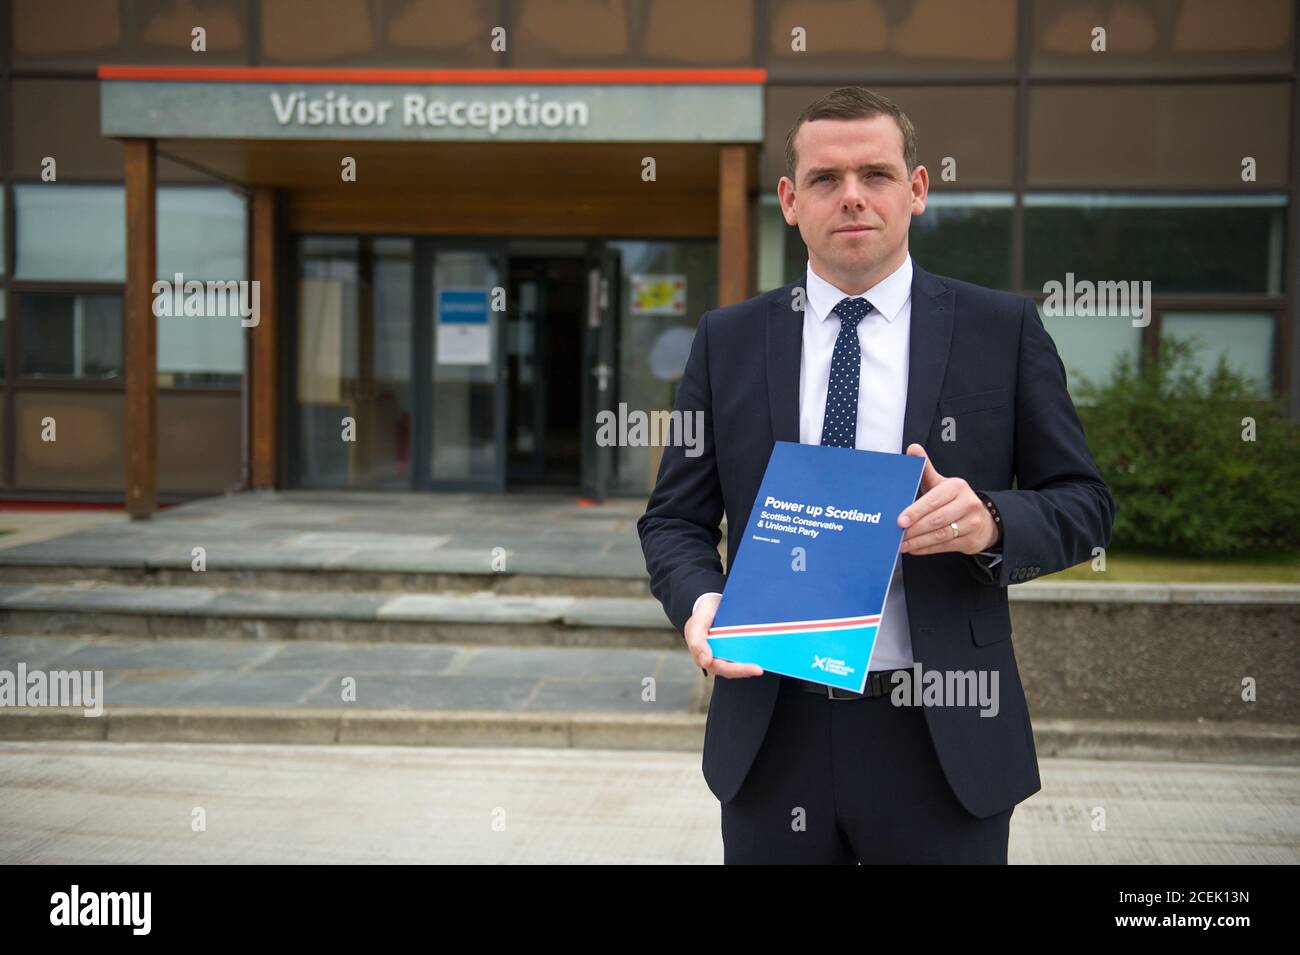 Norbord, Inverness, Scotland, UK. 31 August 2020. Pictured: Douglas Ross MP.  In his first major policy announcement as Scottish Conservative leader, Douglas Ross will launches an ambitious jobs and economic recovery plan in Inverness.   A key part of the plan calls for a massive acceleration of infrastructure investment across Scotland, including a new UK and Scottish Government joint investment vehicle to expand on the success of City and Growth deals and unite all levels of government on bold infrastructure projects. Credit: Colin Fisher/Alamy Live News. Stock Photo